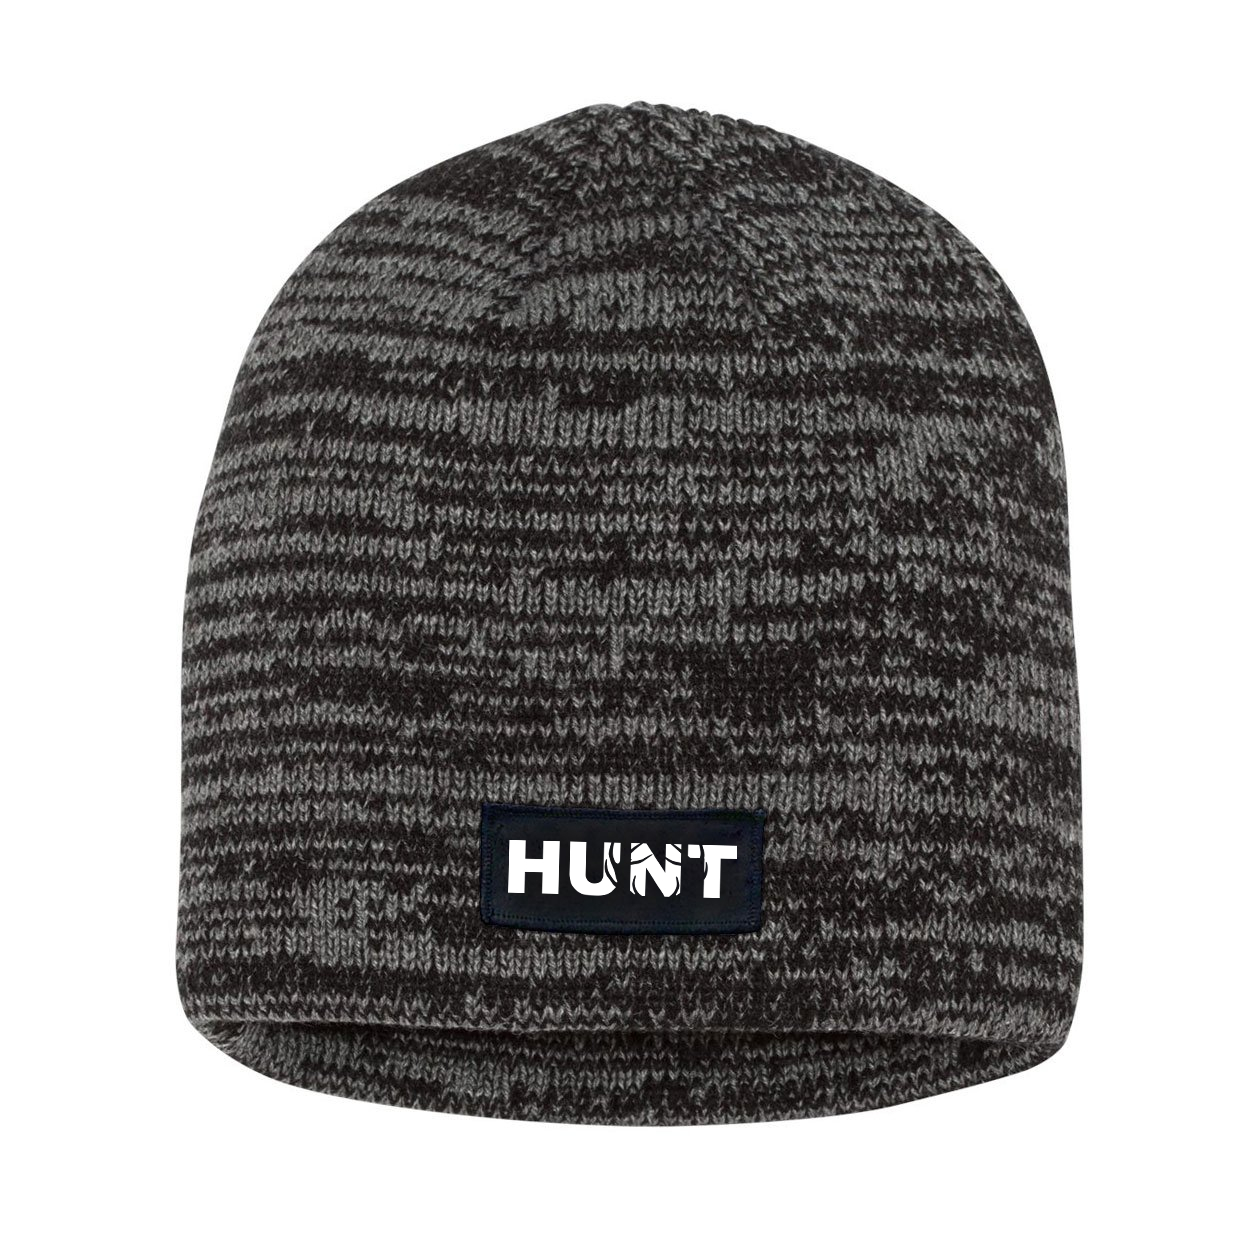 Hunt Rack Logo Night Out Woven Patch Skully Marled Knit Beanie Black/Gray (White Logo)